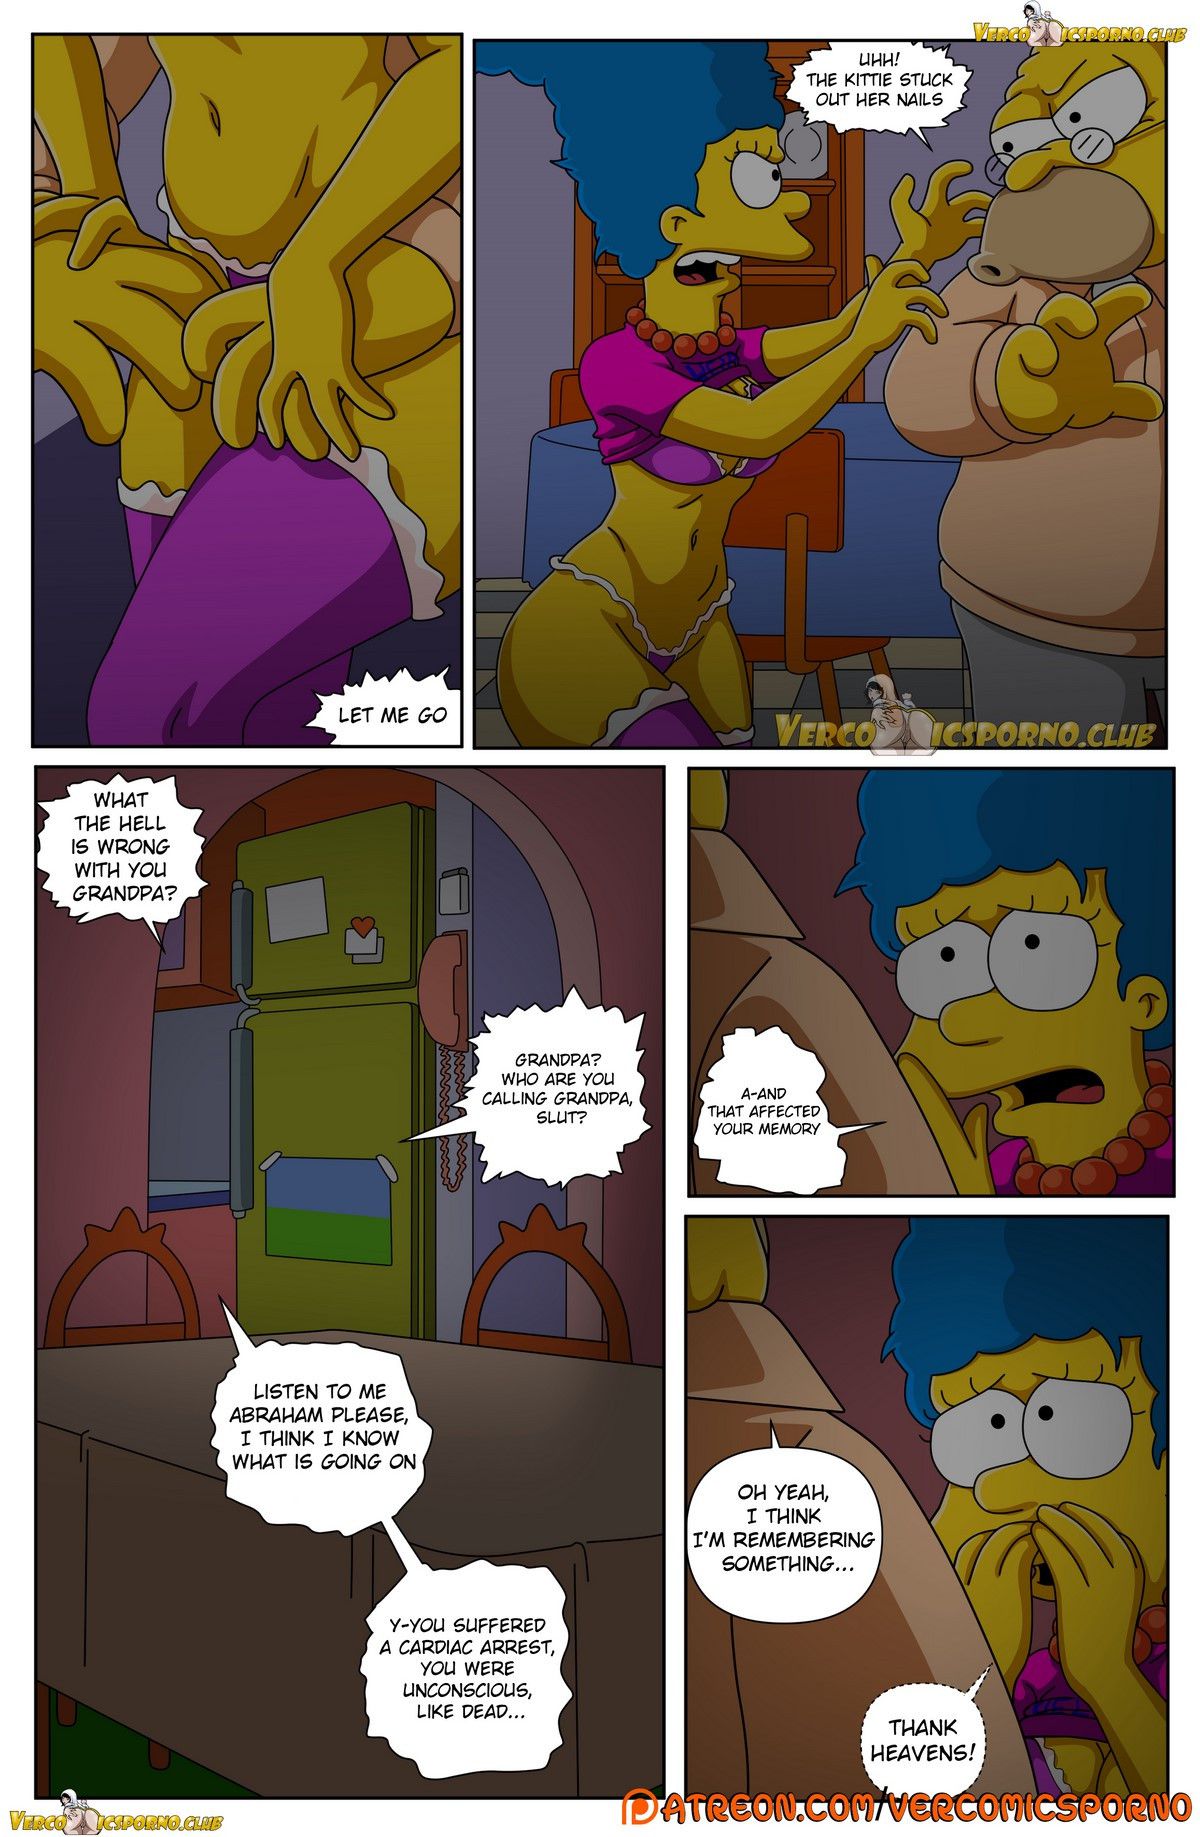 Grandpa and me - [Itooneaxxx] - [Drah Navlag] - [VCP] - [The Simpsons] 67